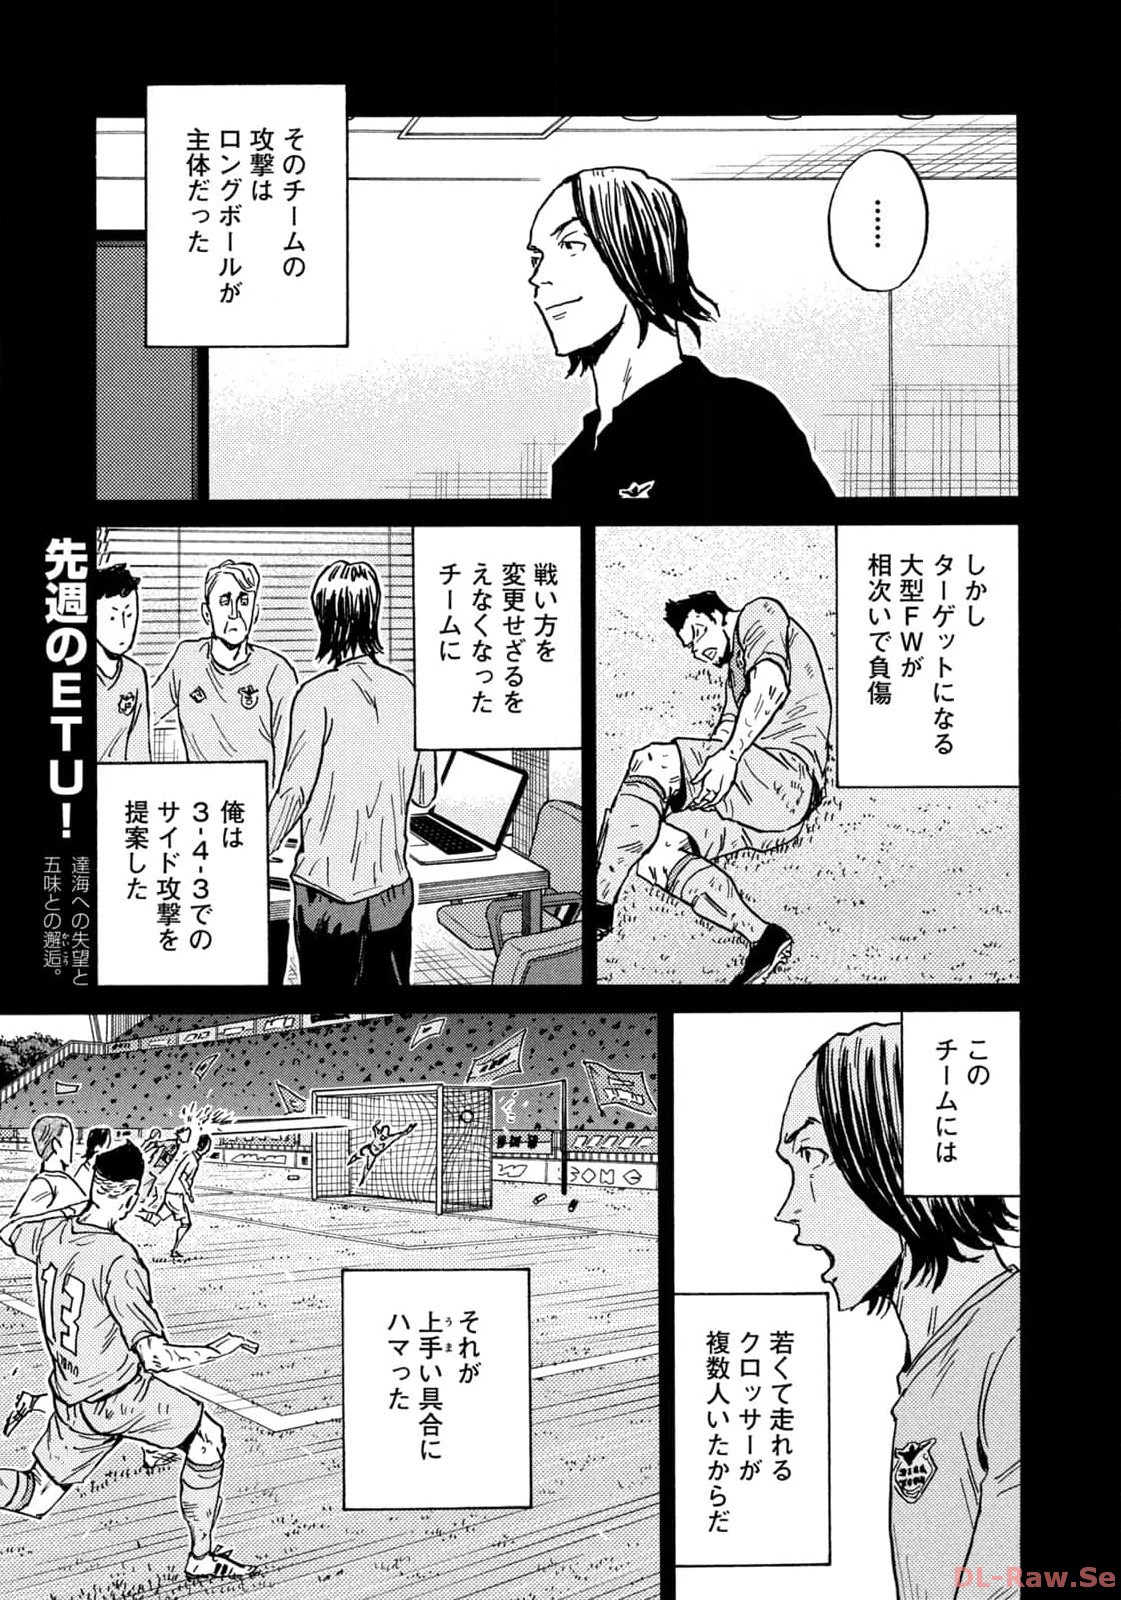 Giant Killing - Chapter 633 - Page 3